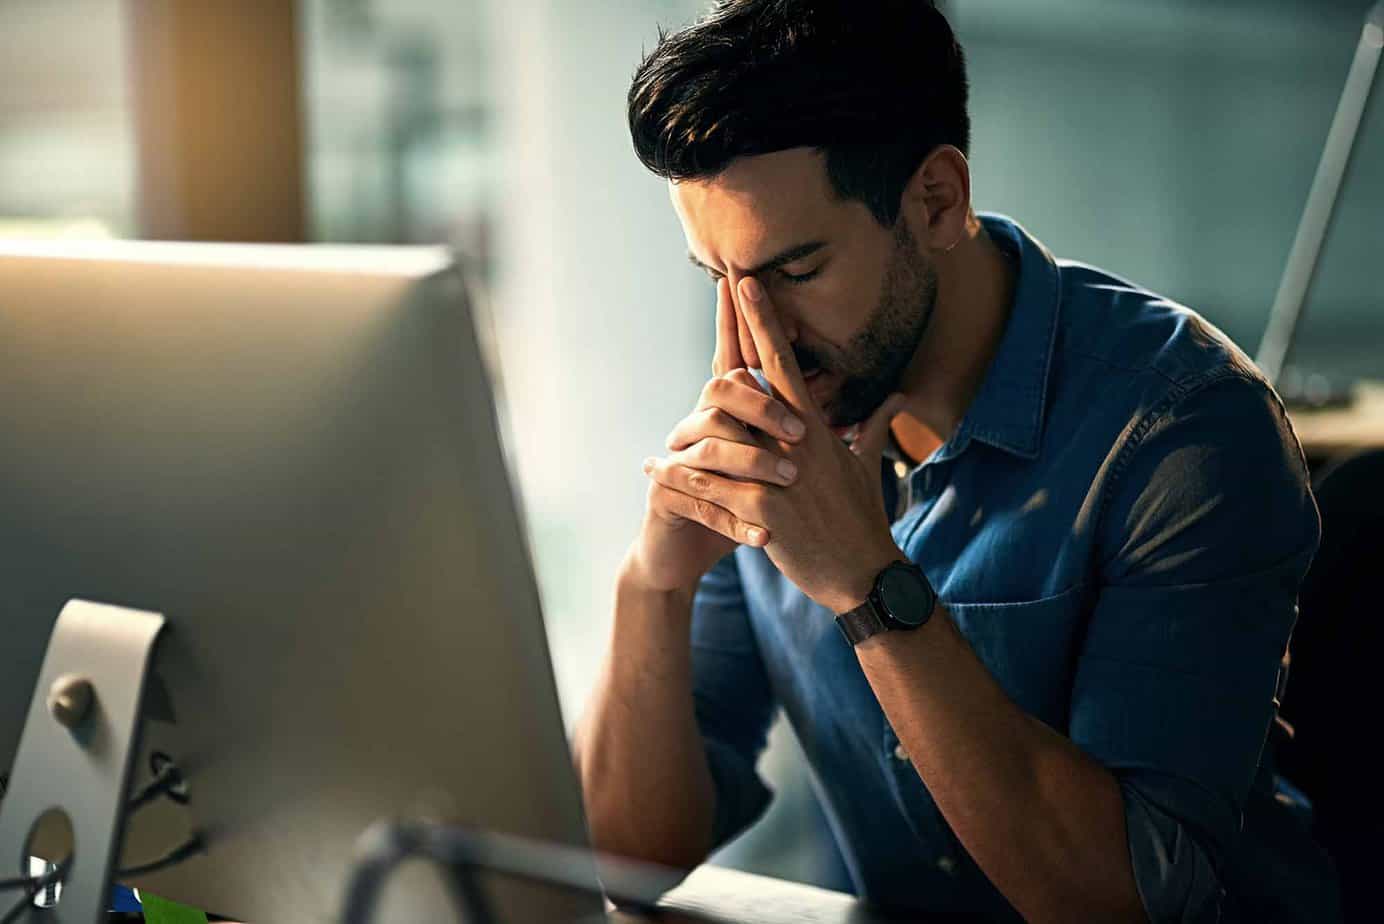 stressed man sitting in front of computer with hands on face